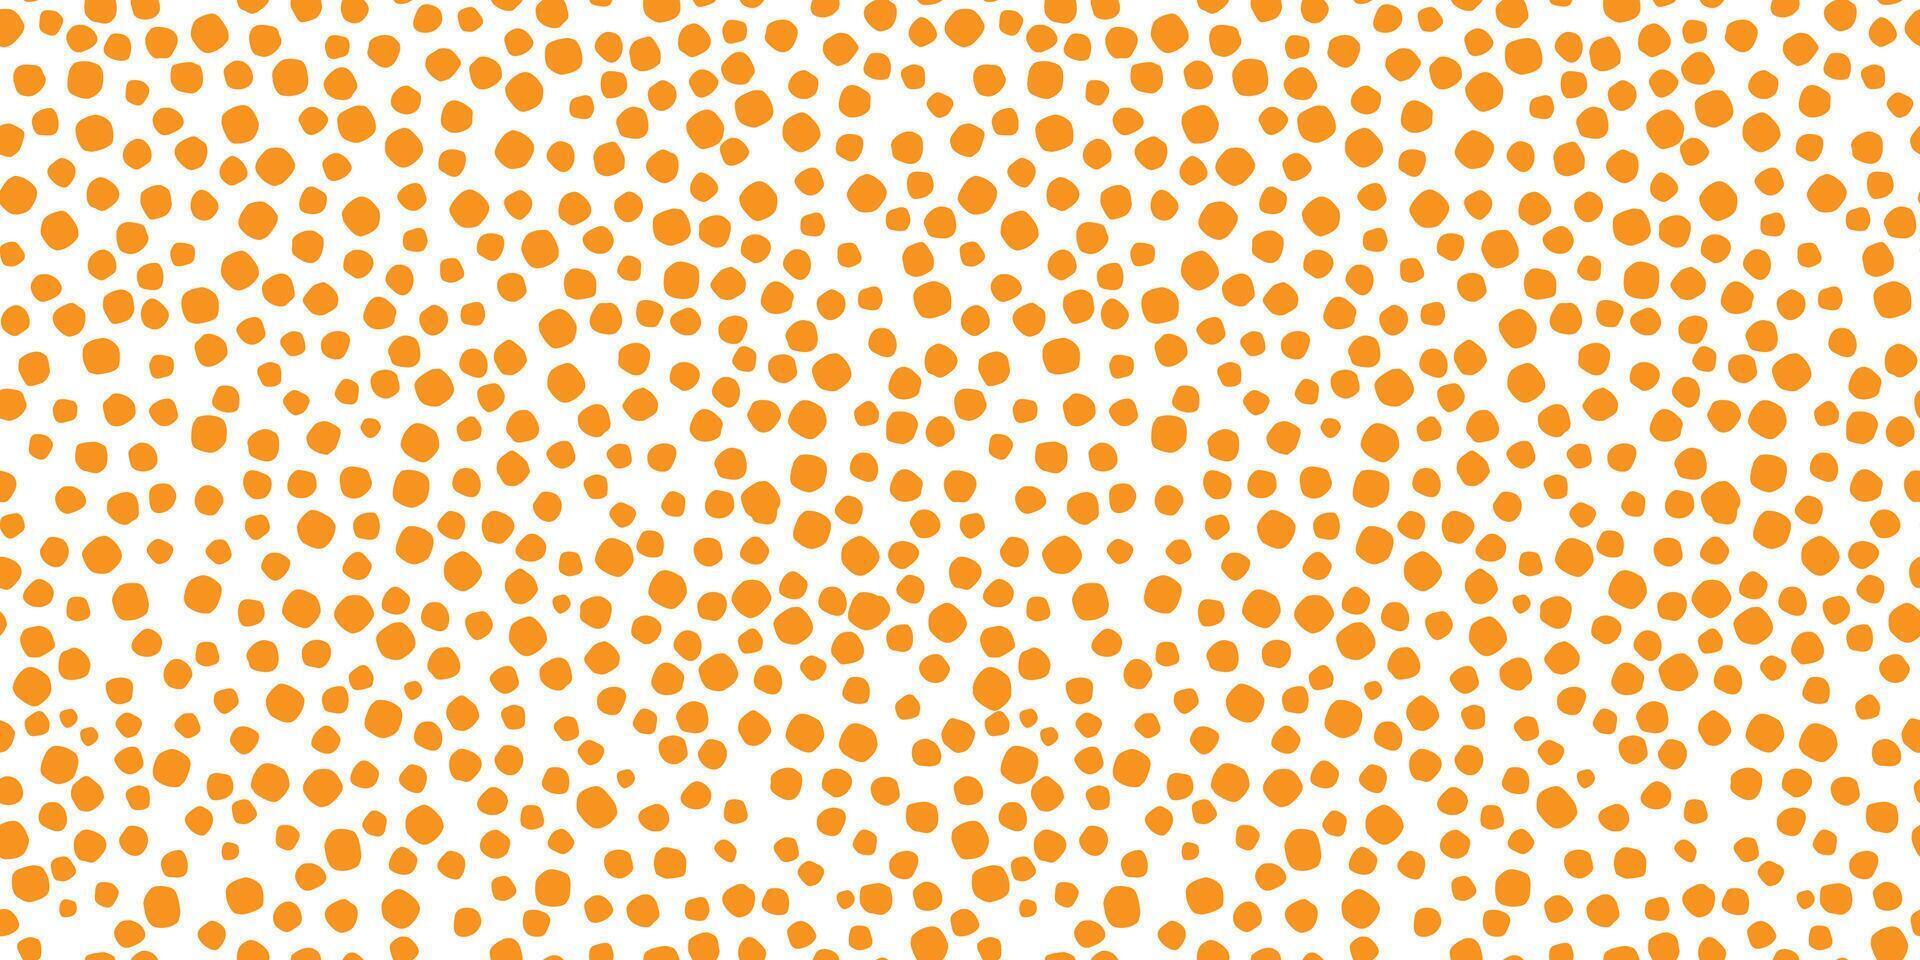 Seamless pattern with abstract spots, dots, macro pollen, uneven circles. A simple print with chaotic random circles. Vector graphics.